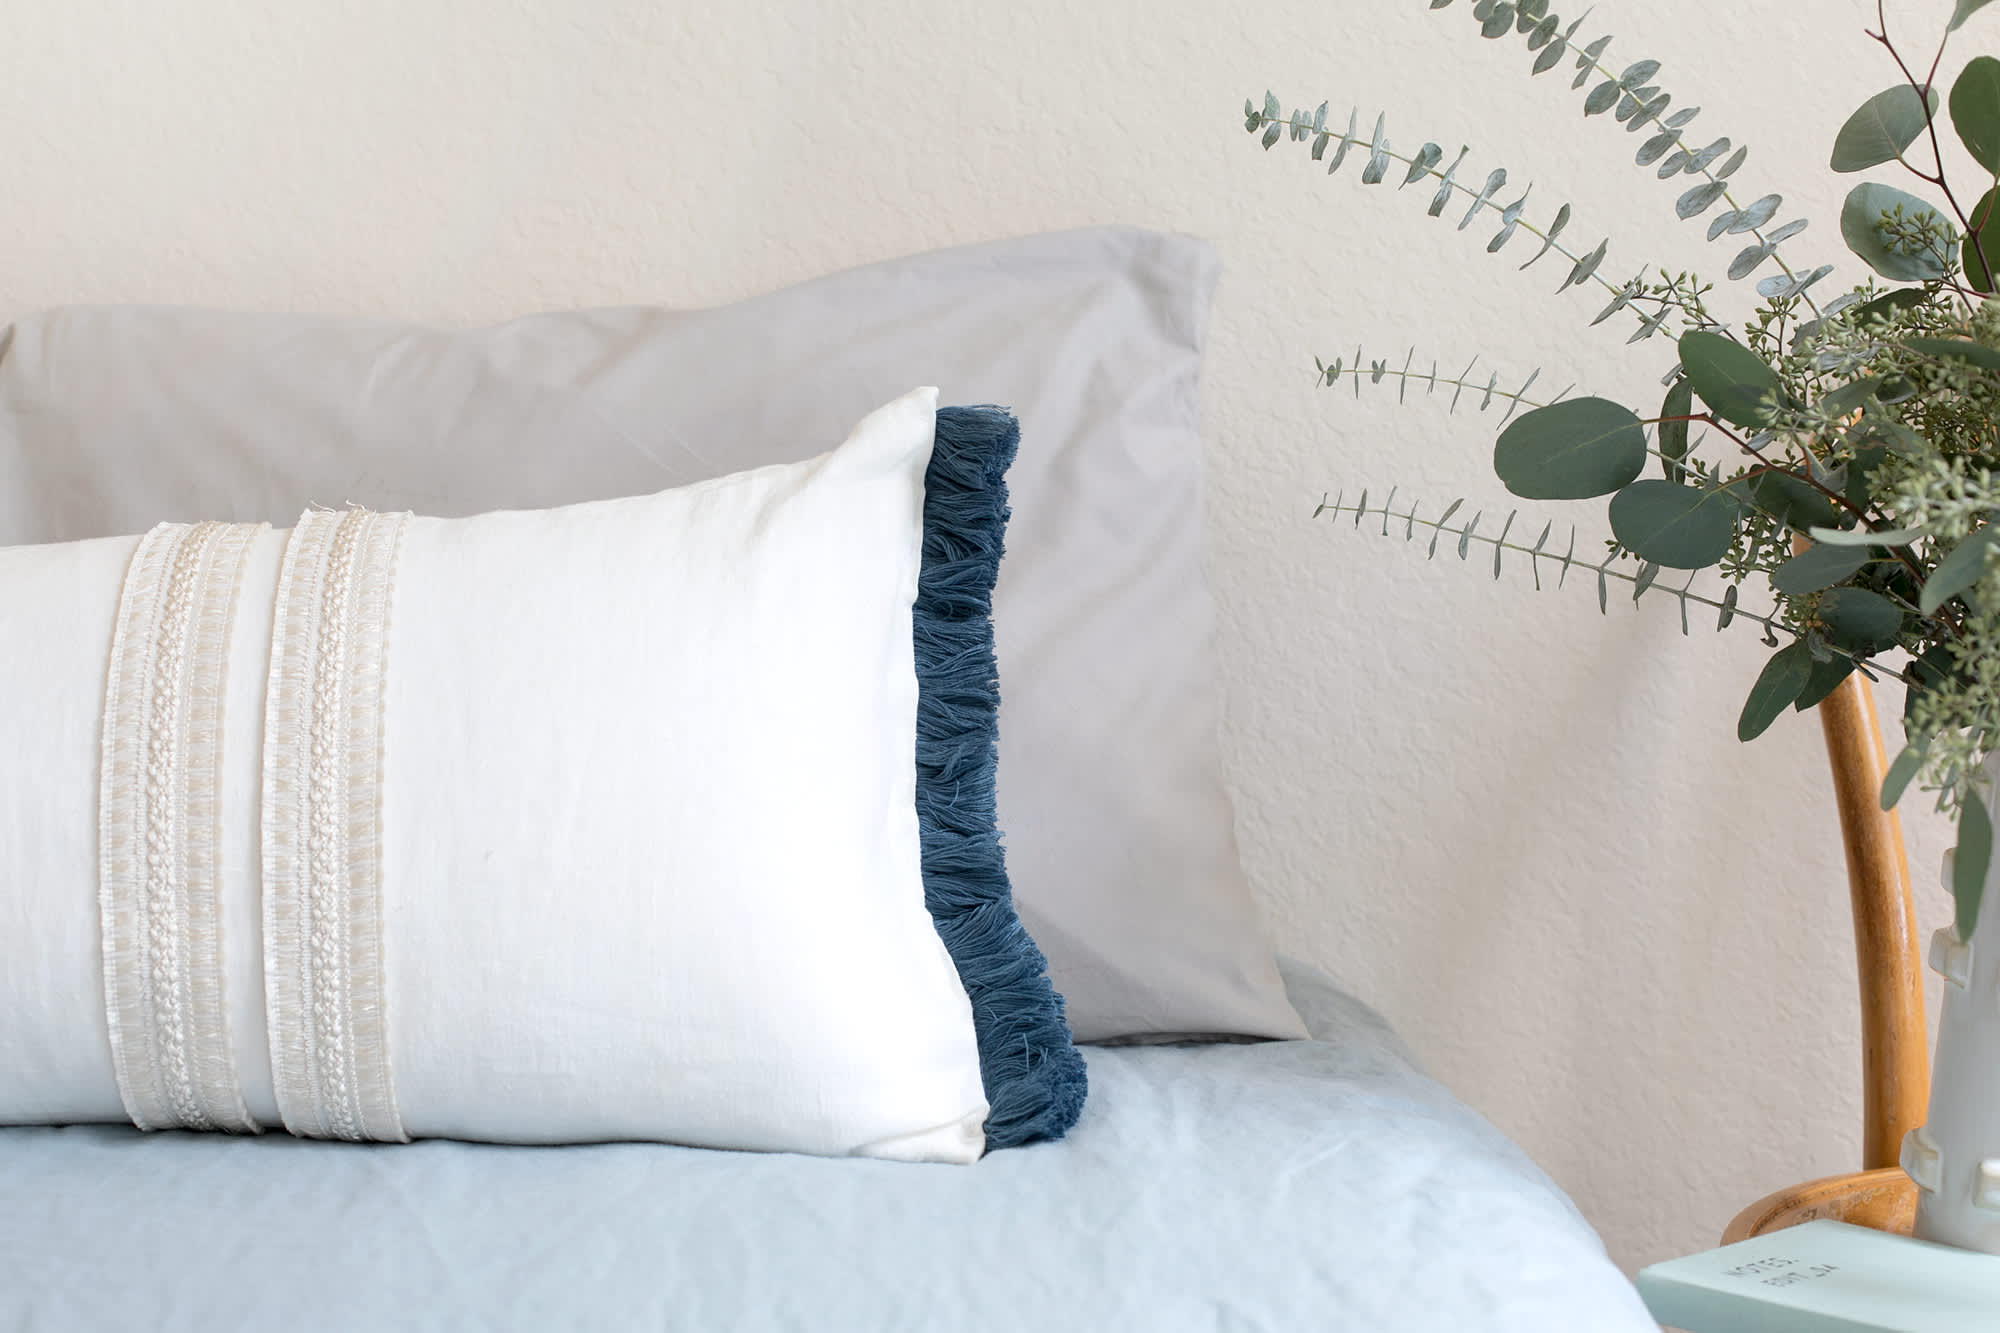 HOW TO MAKE AN EXTRA LONG LUMBAR PILLOW STORY - Paper and Stitch